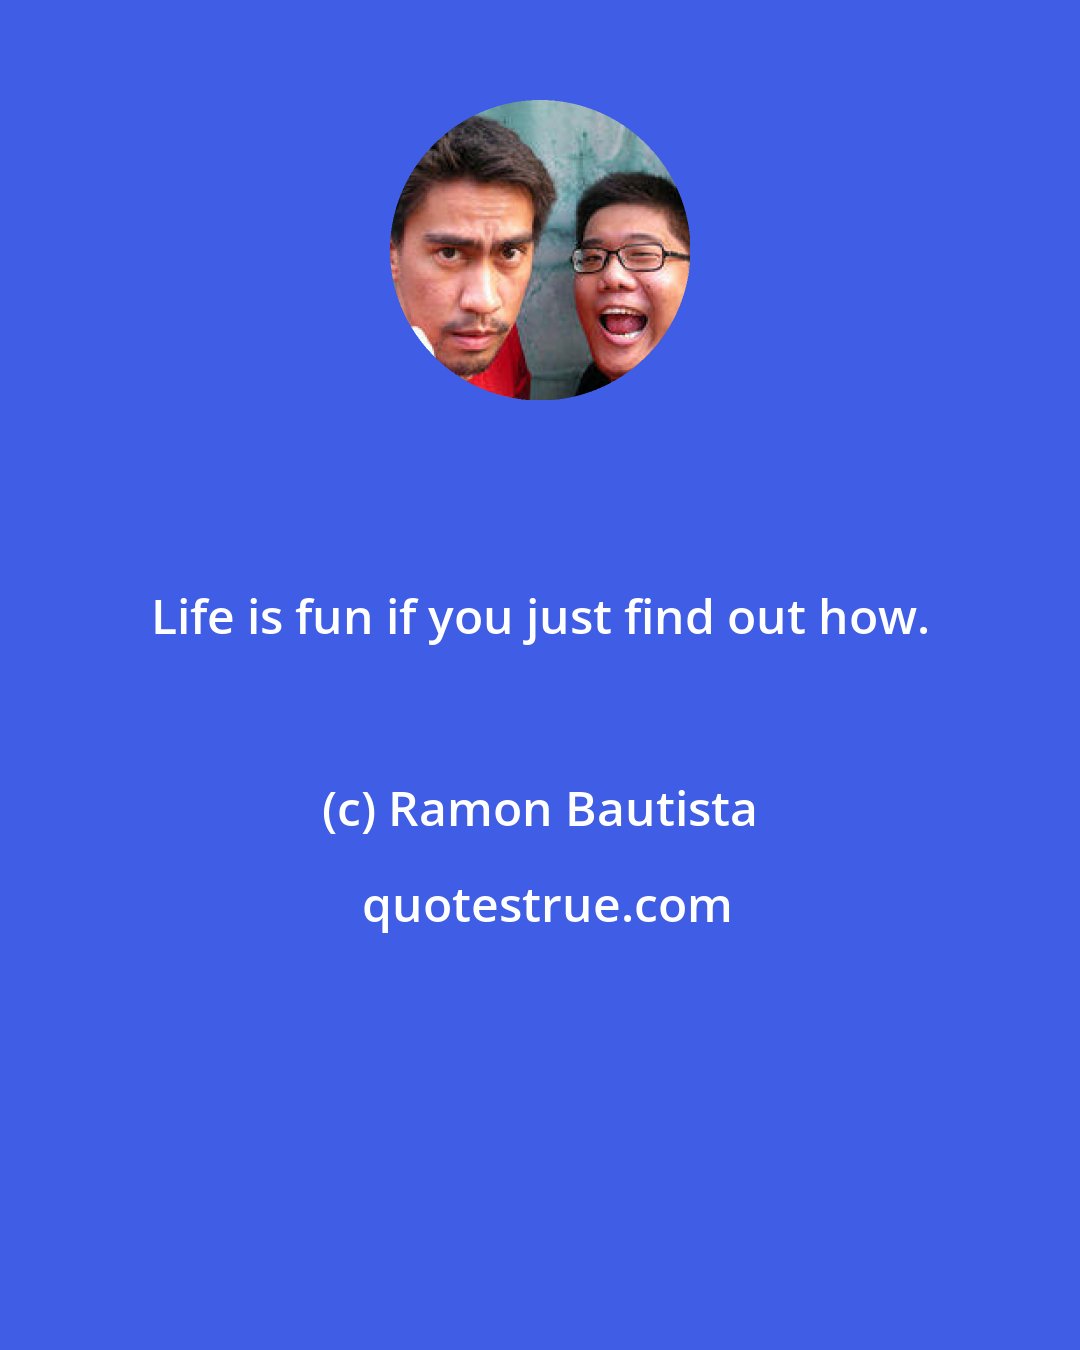 Ramon Bautista: Life is fun if you just find out how.